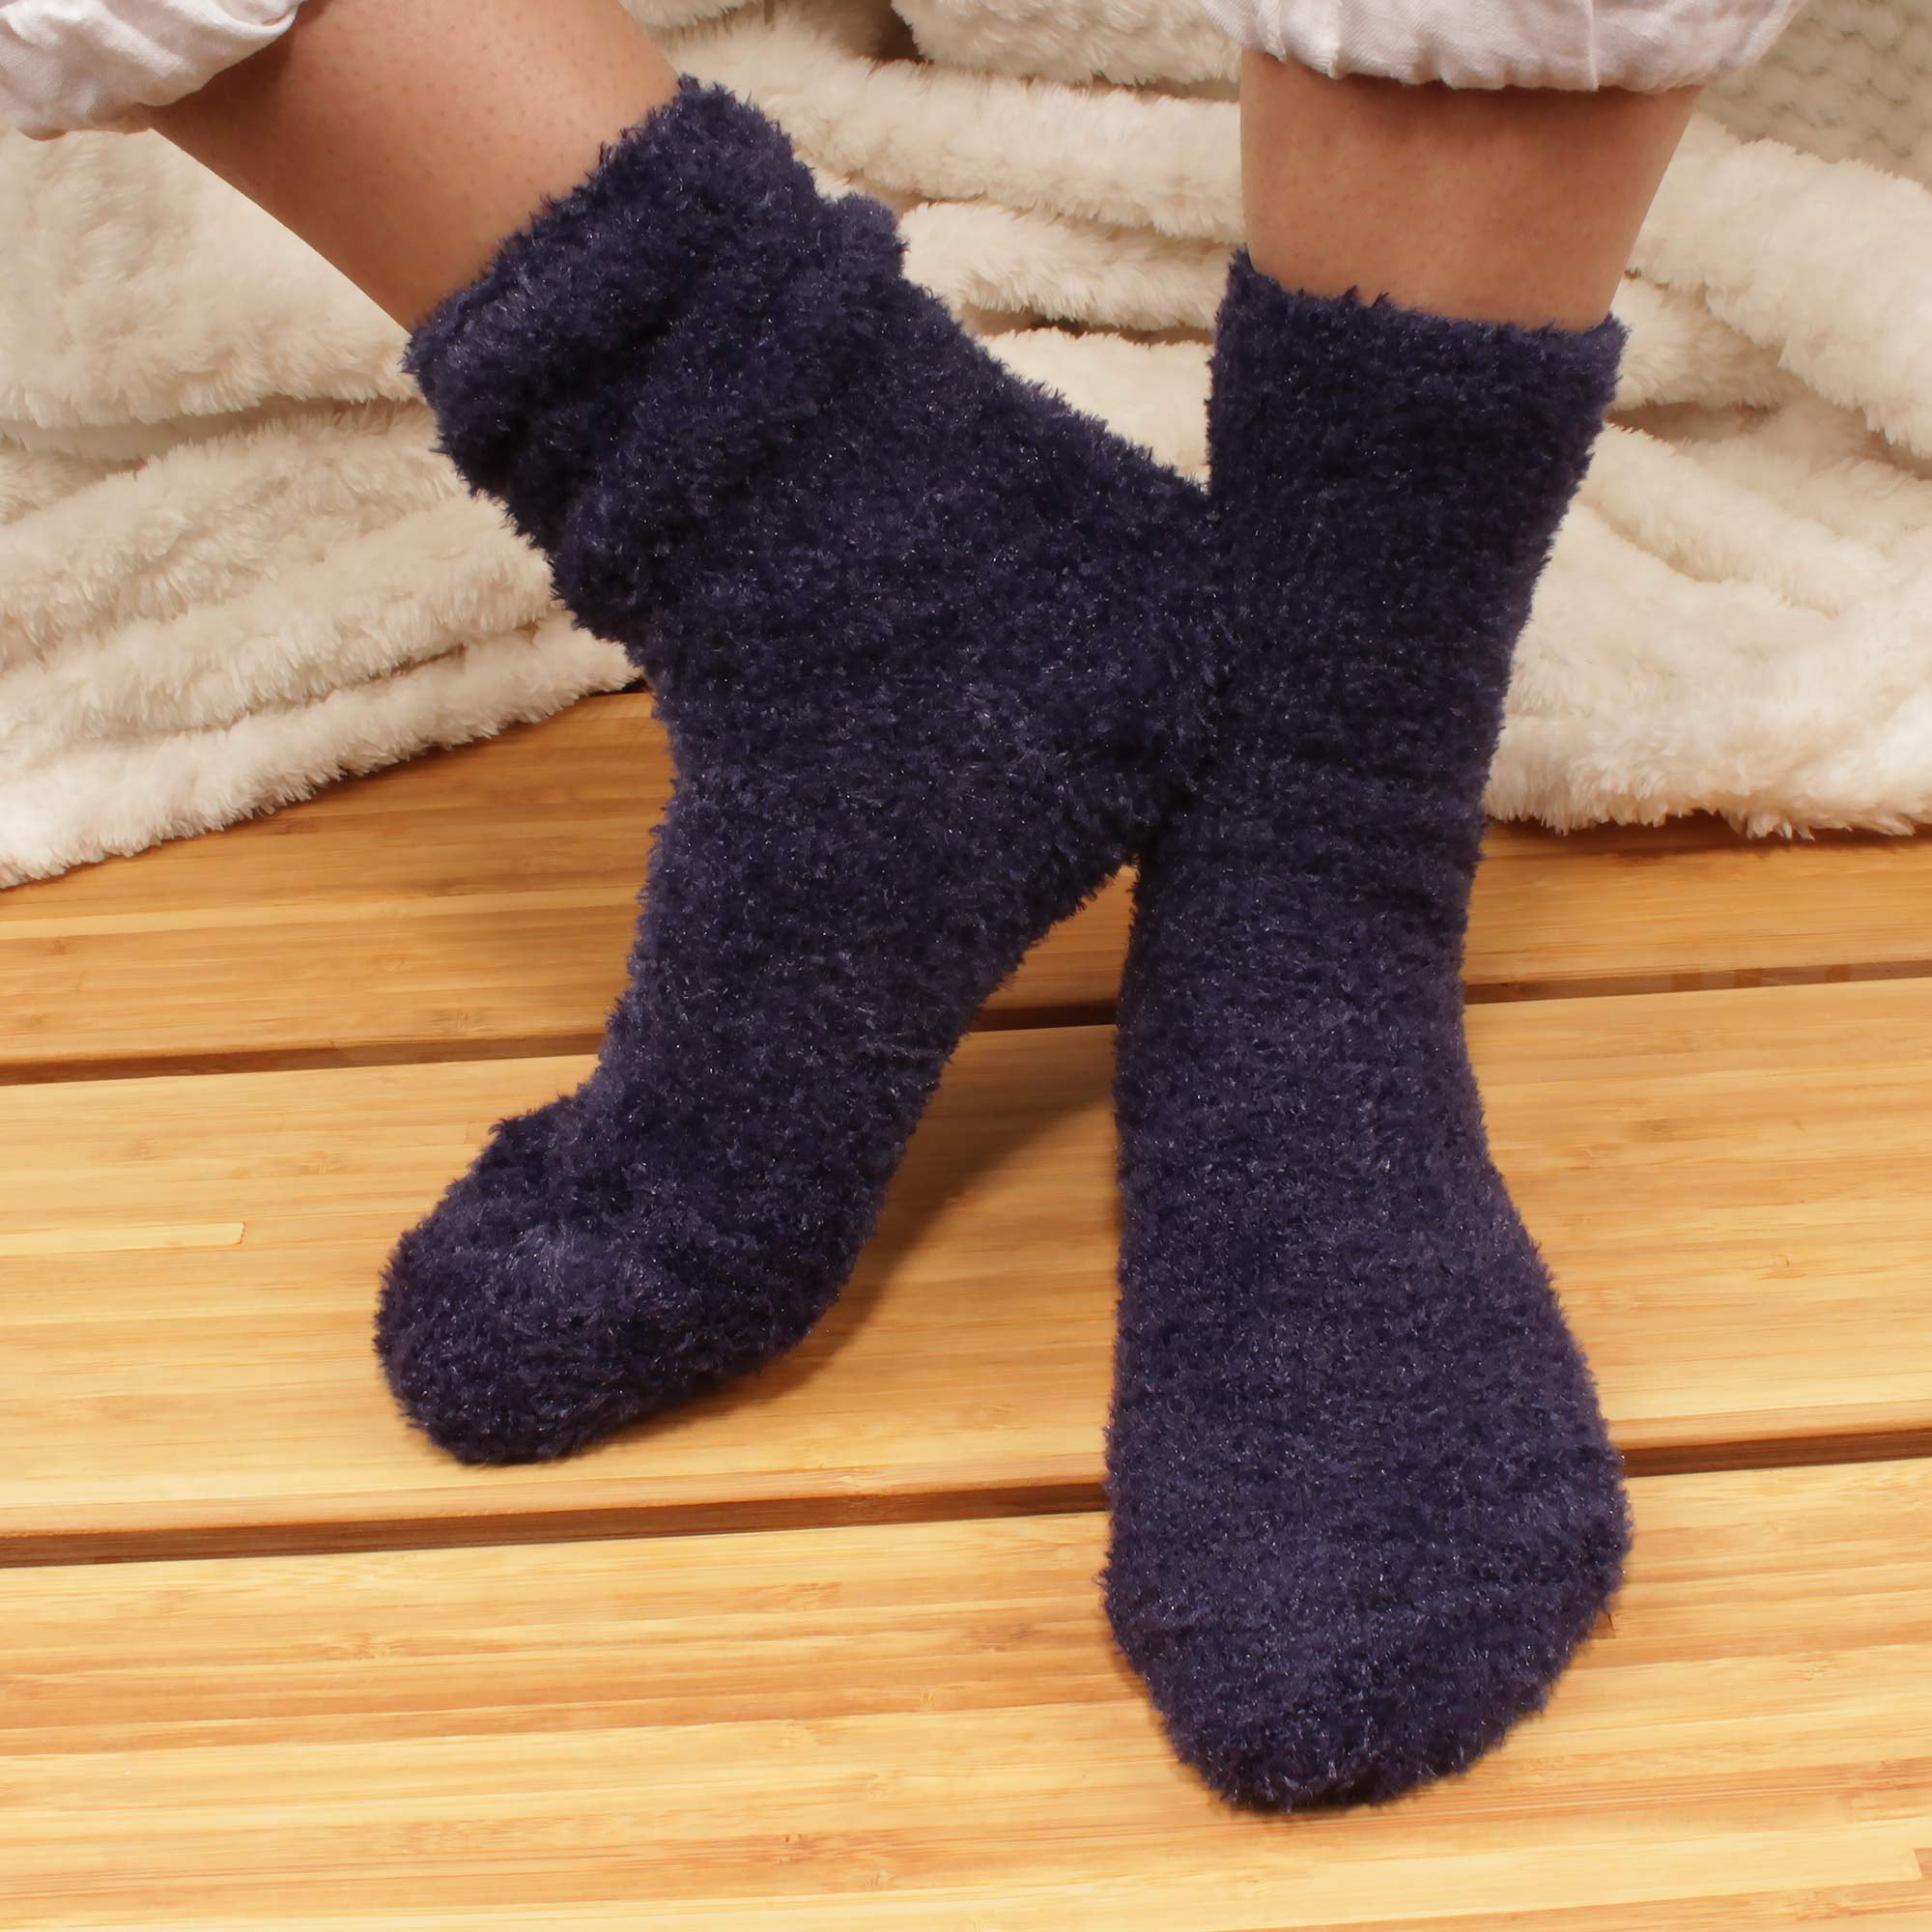 Women's Super Soft and Cozy Feather Light Fuzzy Socks - Cream White - XL -  4 Pair Value Pack